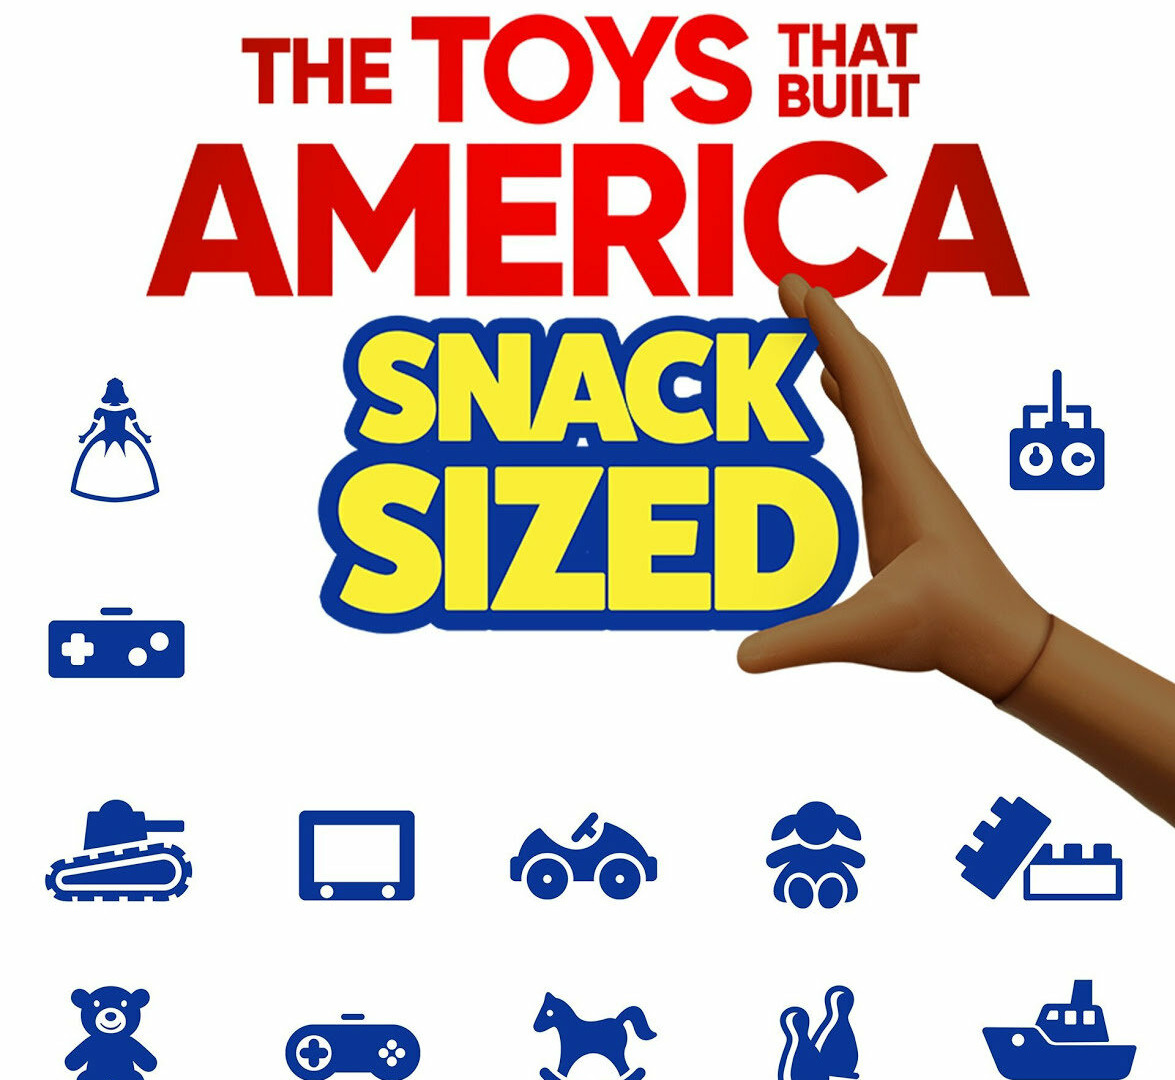 Show The Toys That Built America: Snack Sized